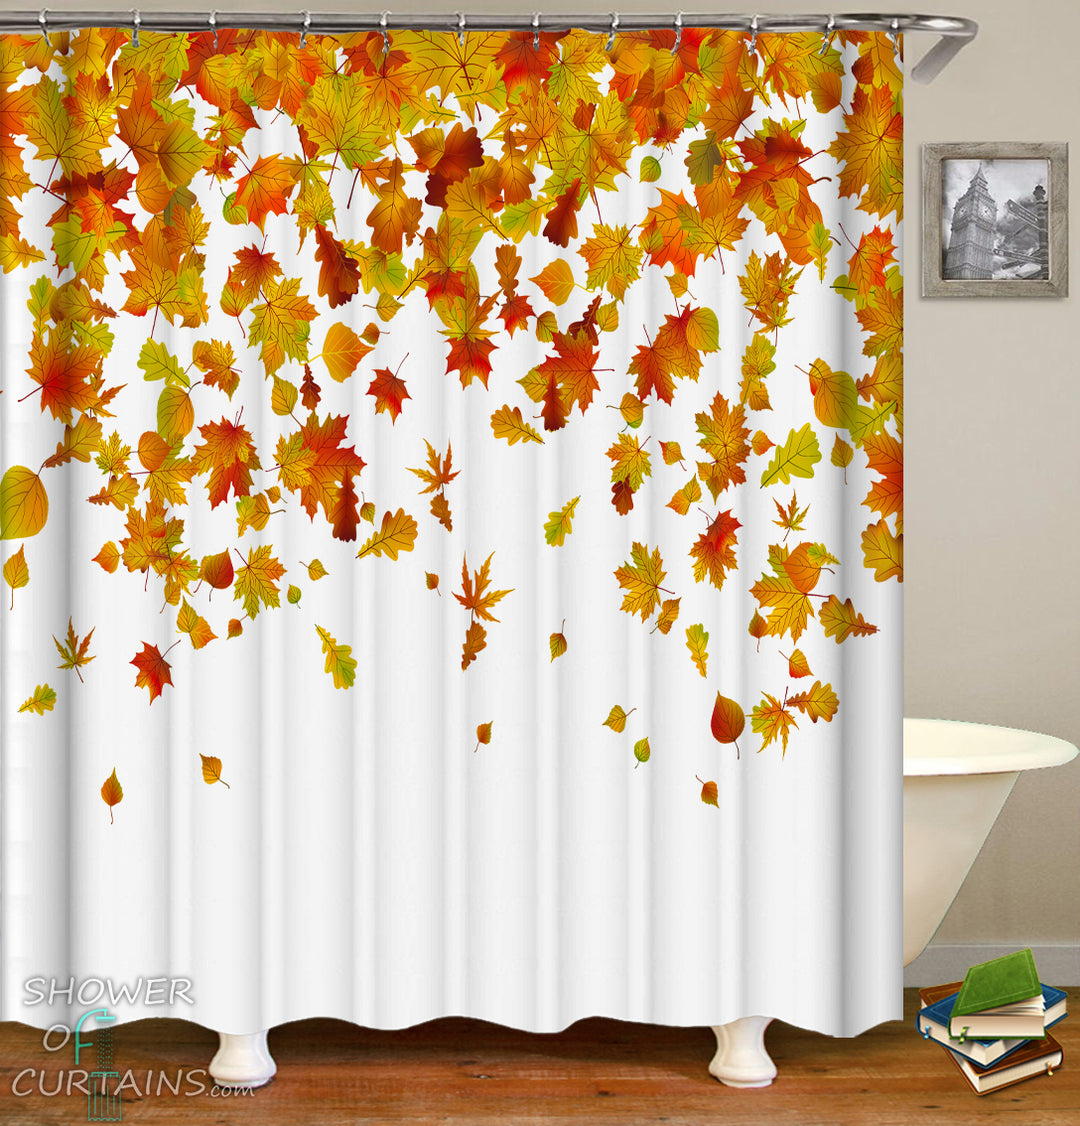 Fall Shower Curtains